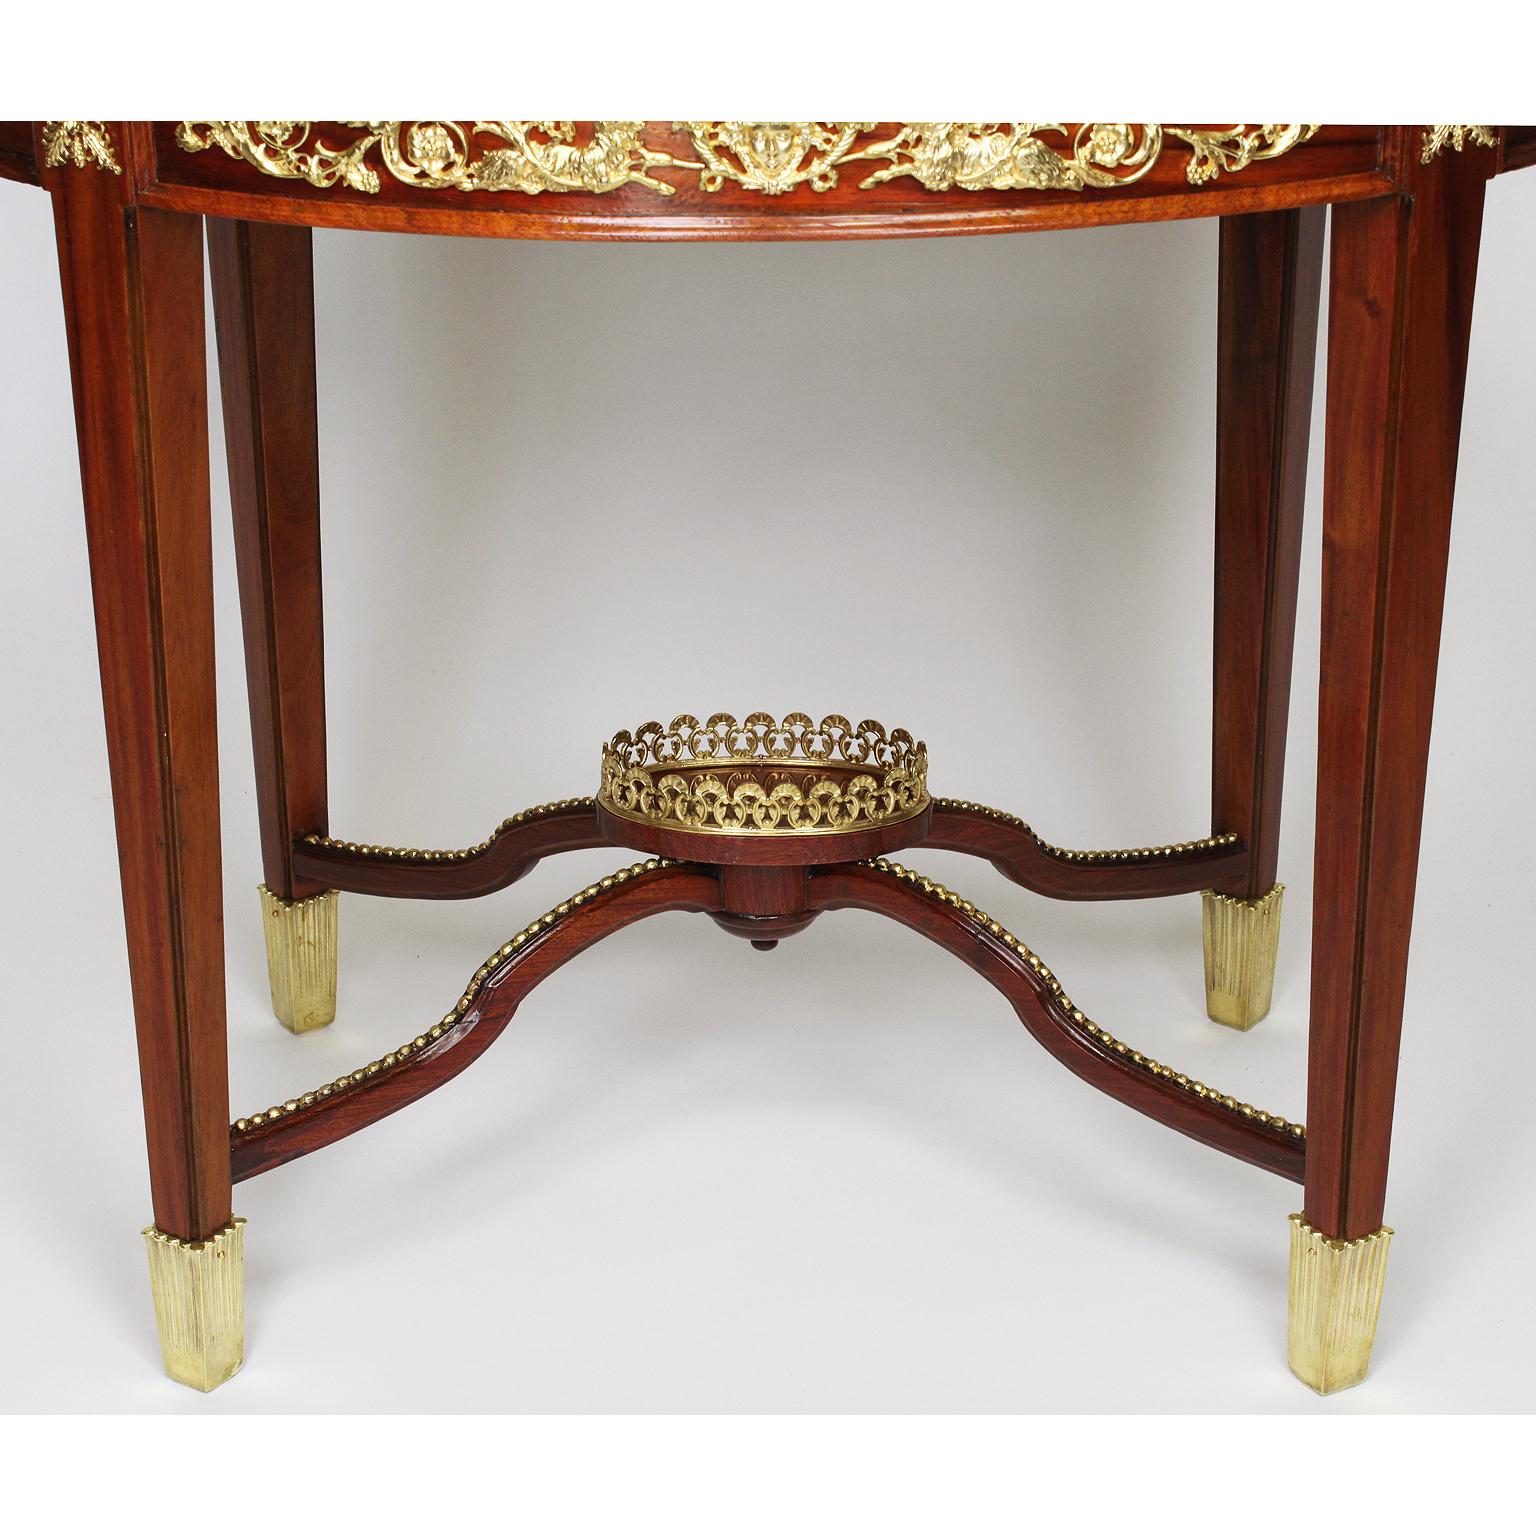 20th Century Louis XVI Style Mahogany and Ormolu Mounted 2-Tier Dessert Table by P. E. Guerin For Sale